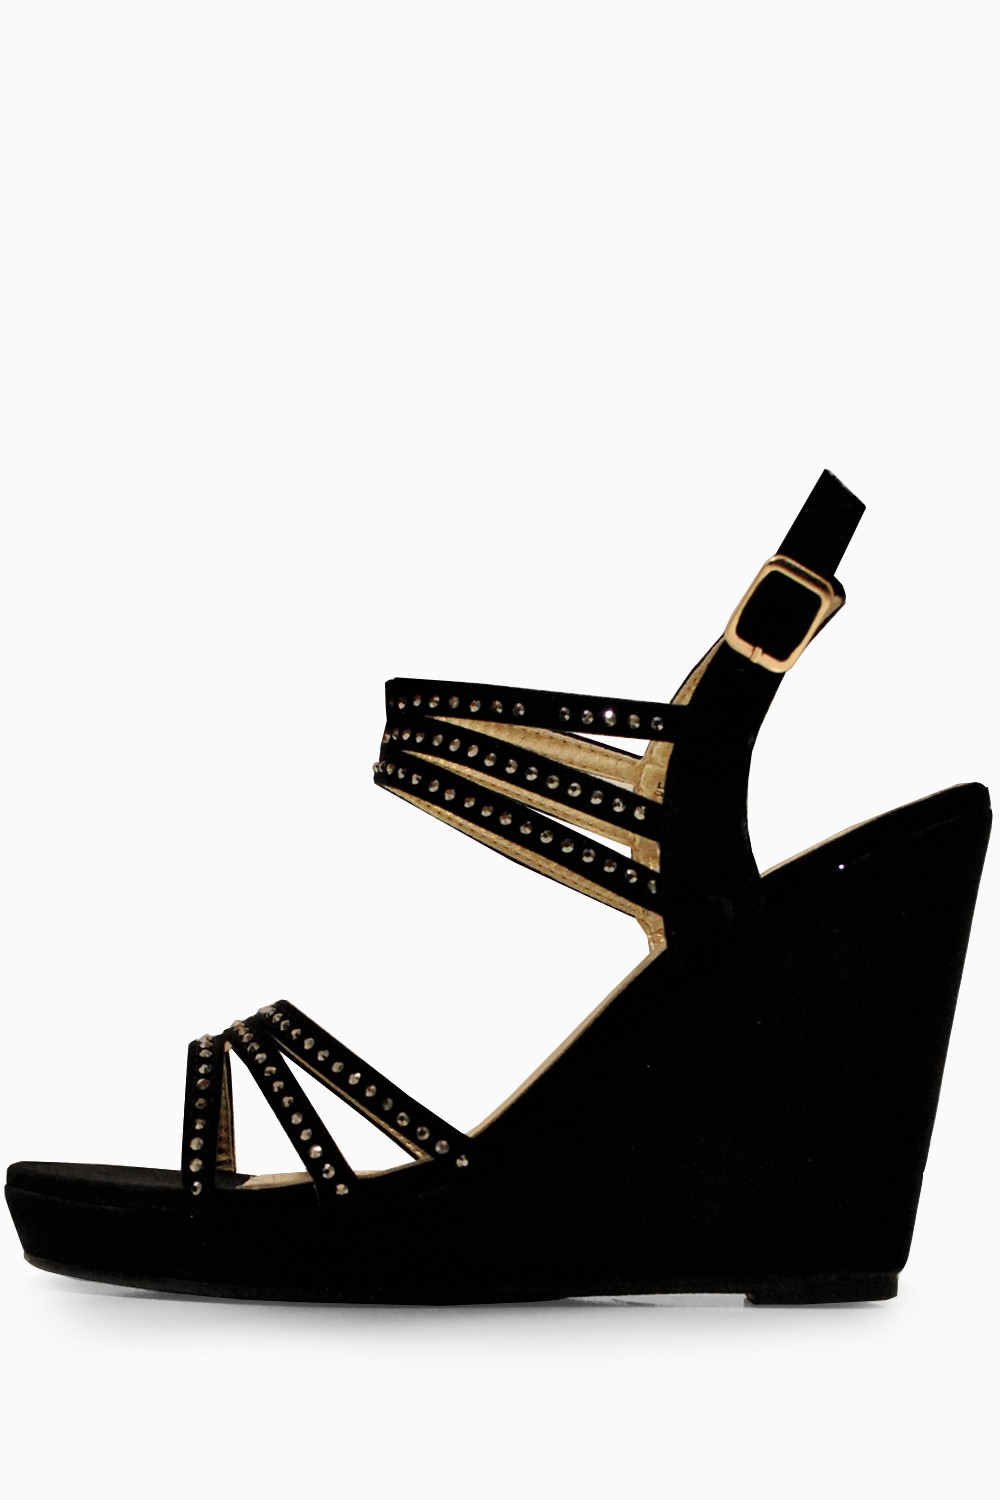 Sole City Shanice Embellished Strappy Wedge Sandals in Black | iCLOTHING